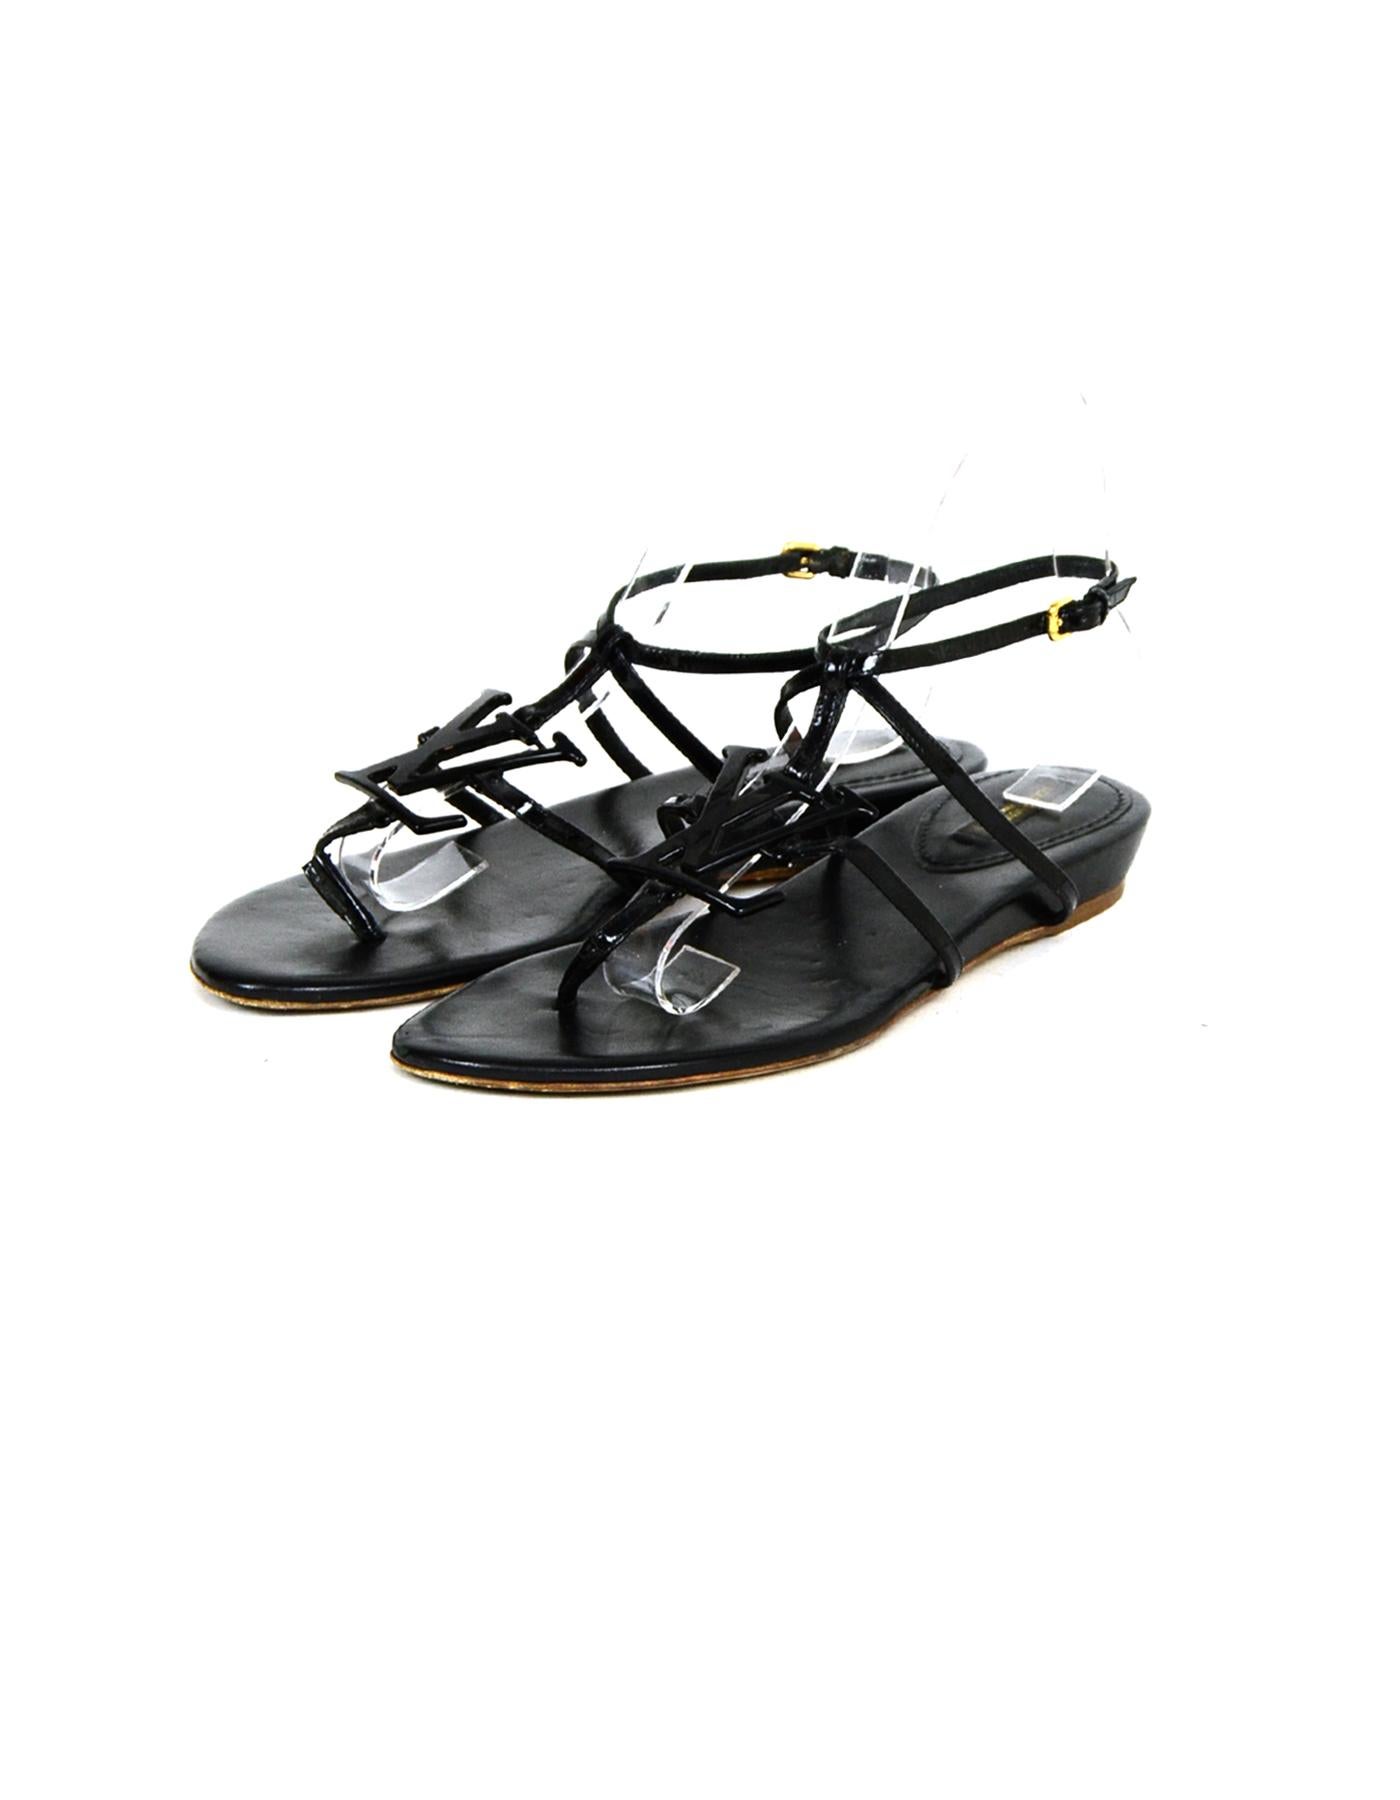 Louis Vuitton Black Patent Leather Flat Sandal w/ Resin LV

Made In: Italy
Color: Black
Hardware: Goldtone
Materials: Patent leather straps, Resin LV, Leather insole.
Closure/Opening: Side buckle
Overall Condition: Very good pre-owned condition,